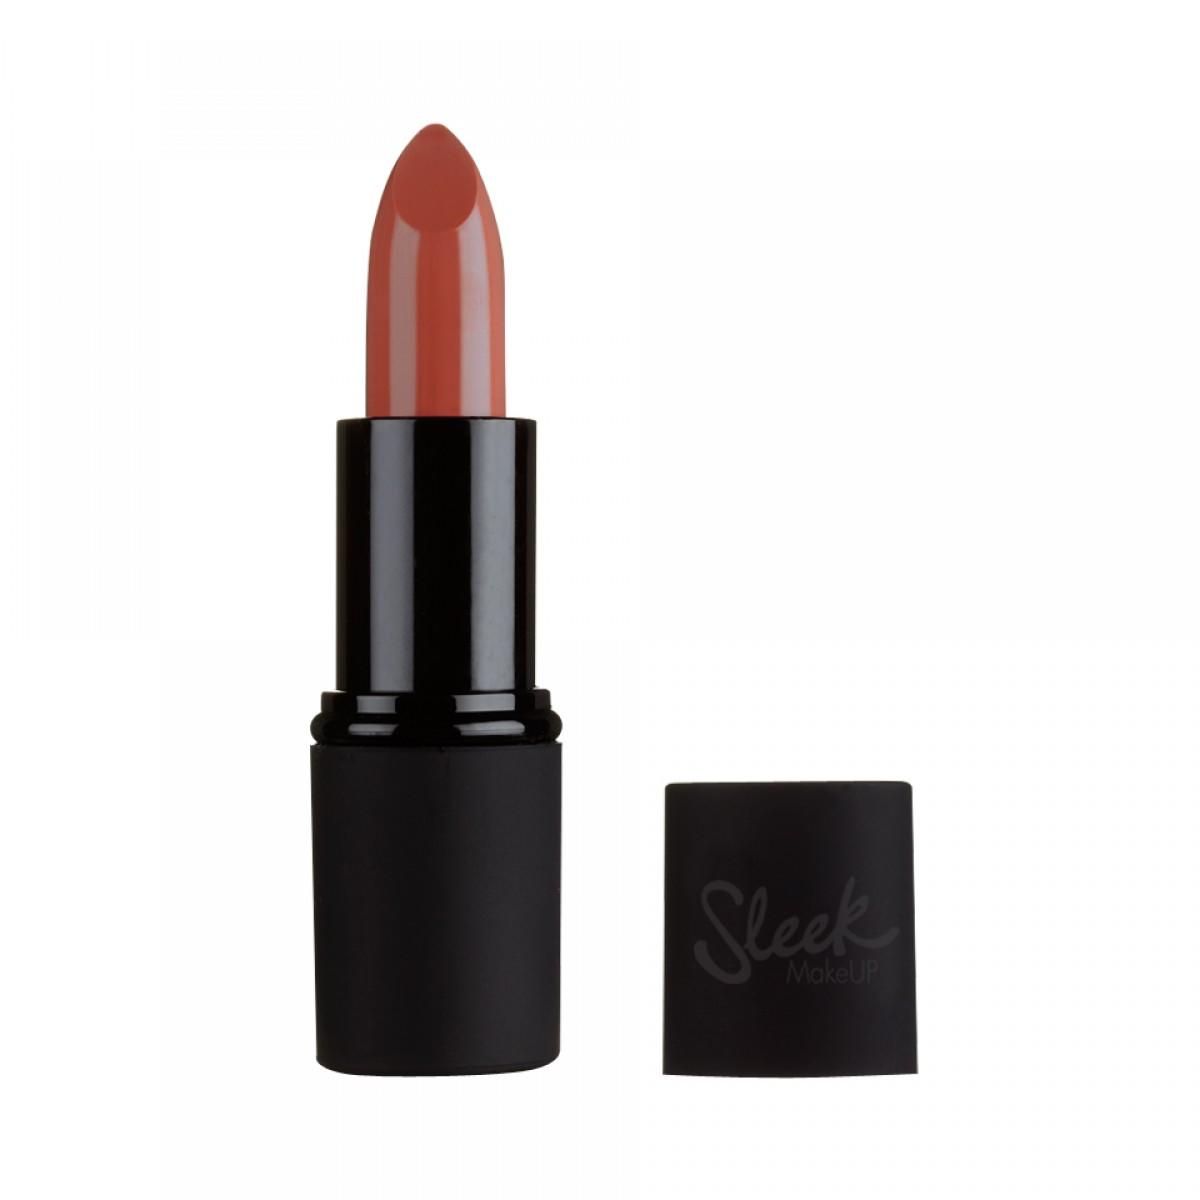 Sleek MakeUP True Colour Lipstick Barely There 776